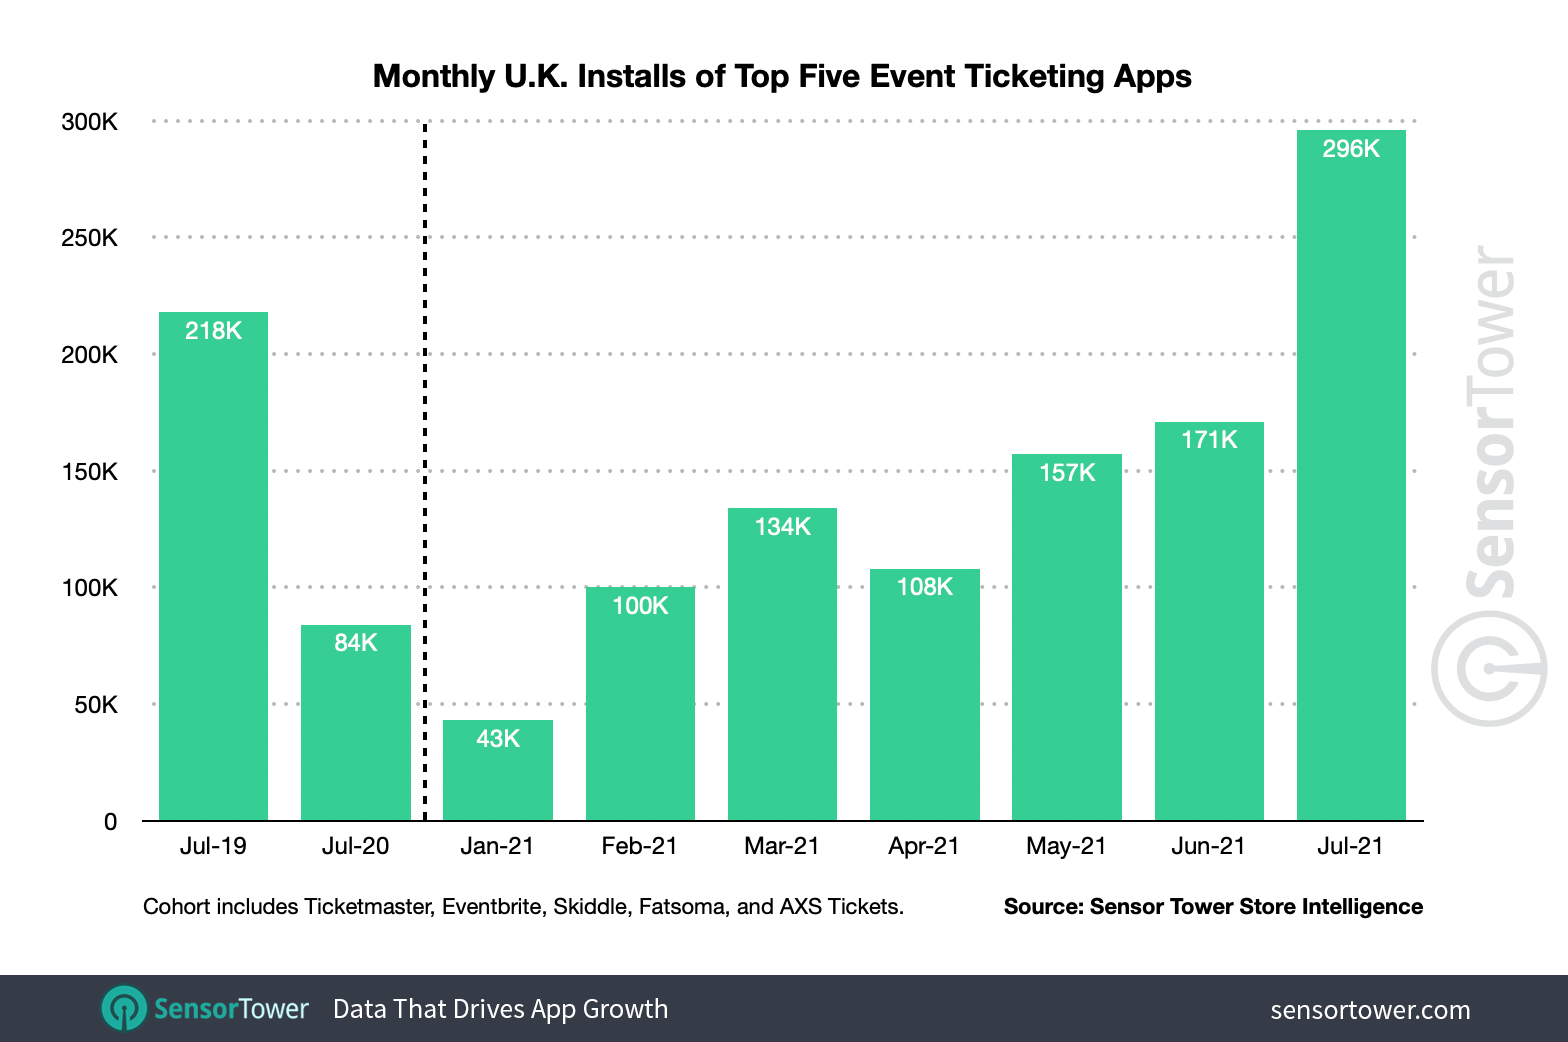 U.K. monthly installs of the top event ticketing apps